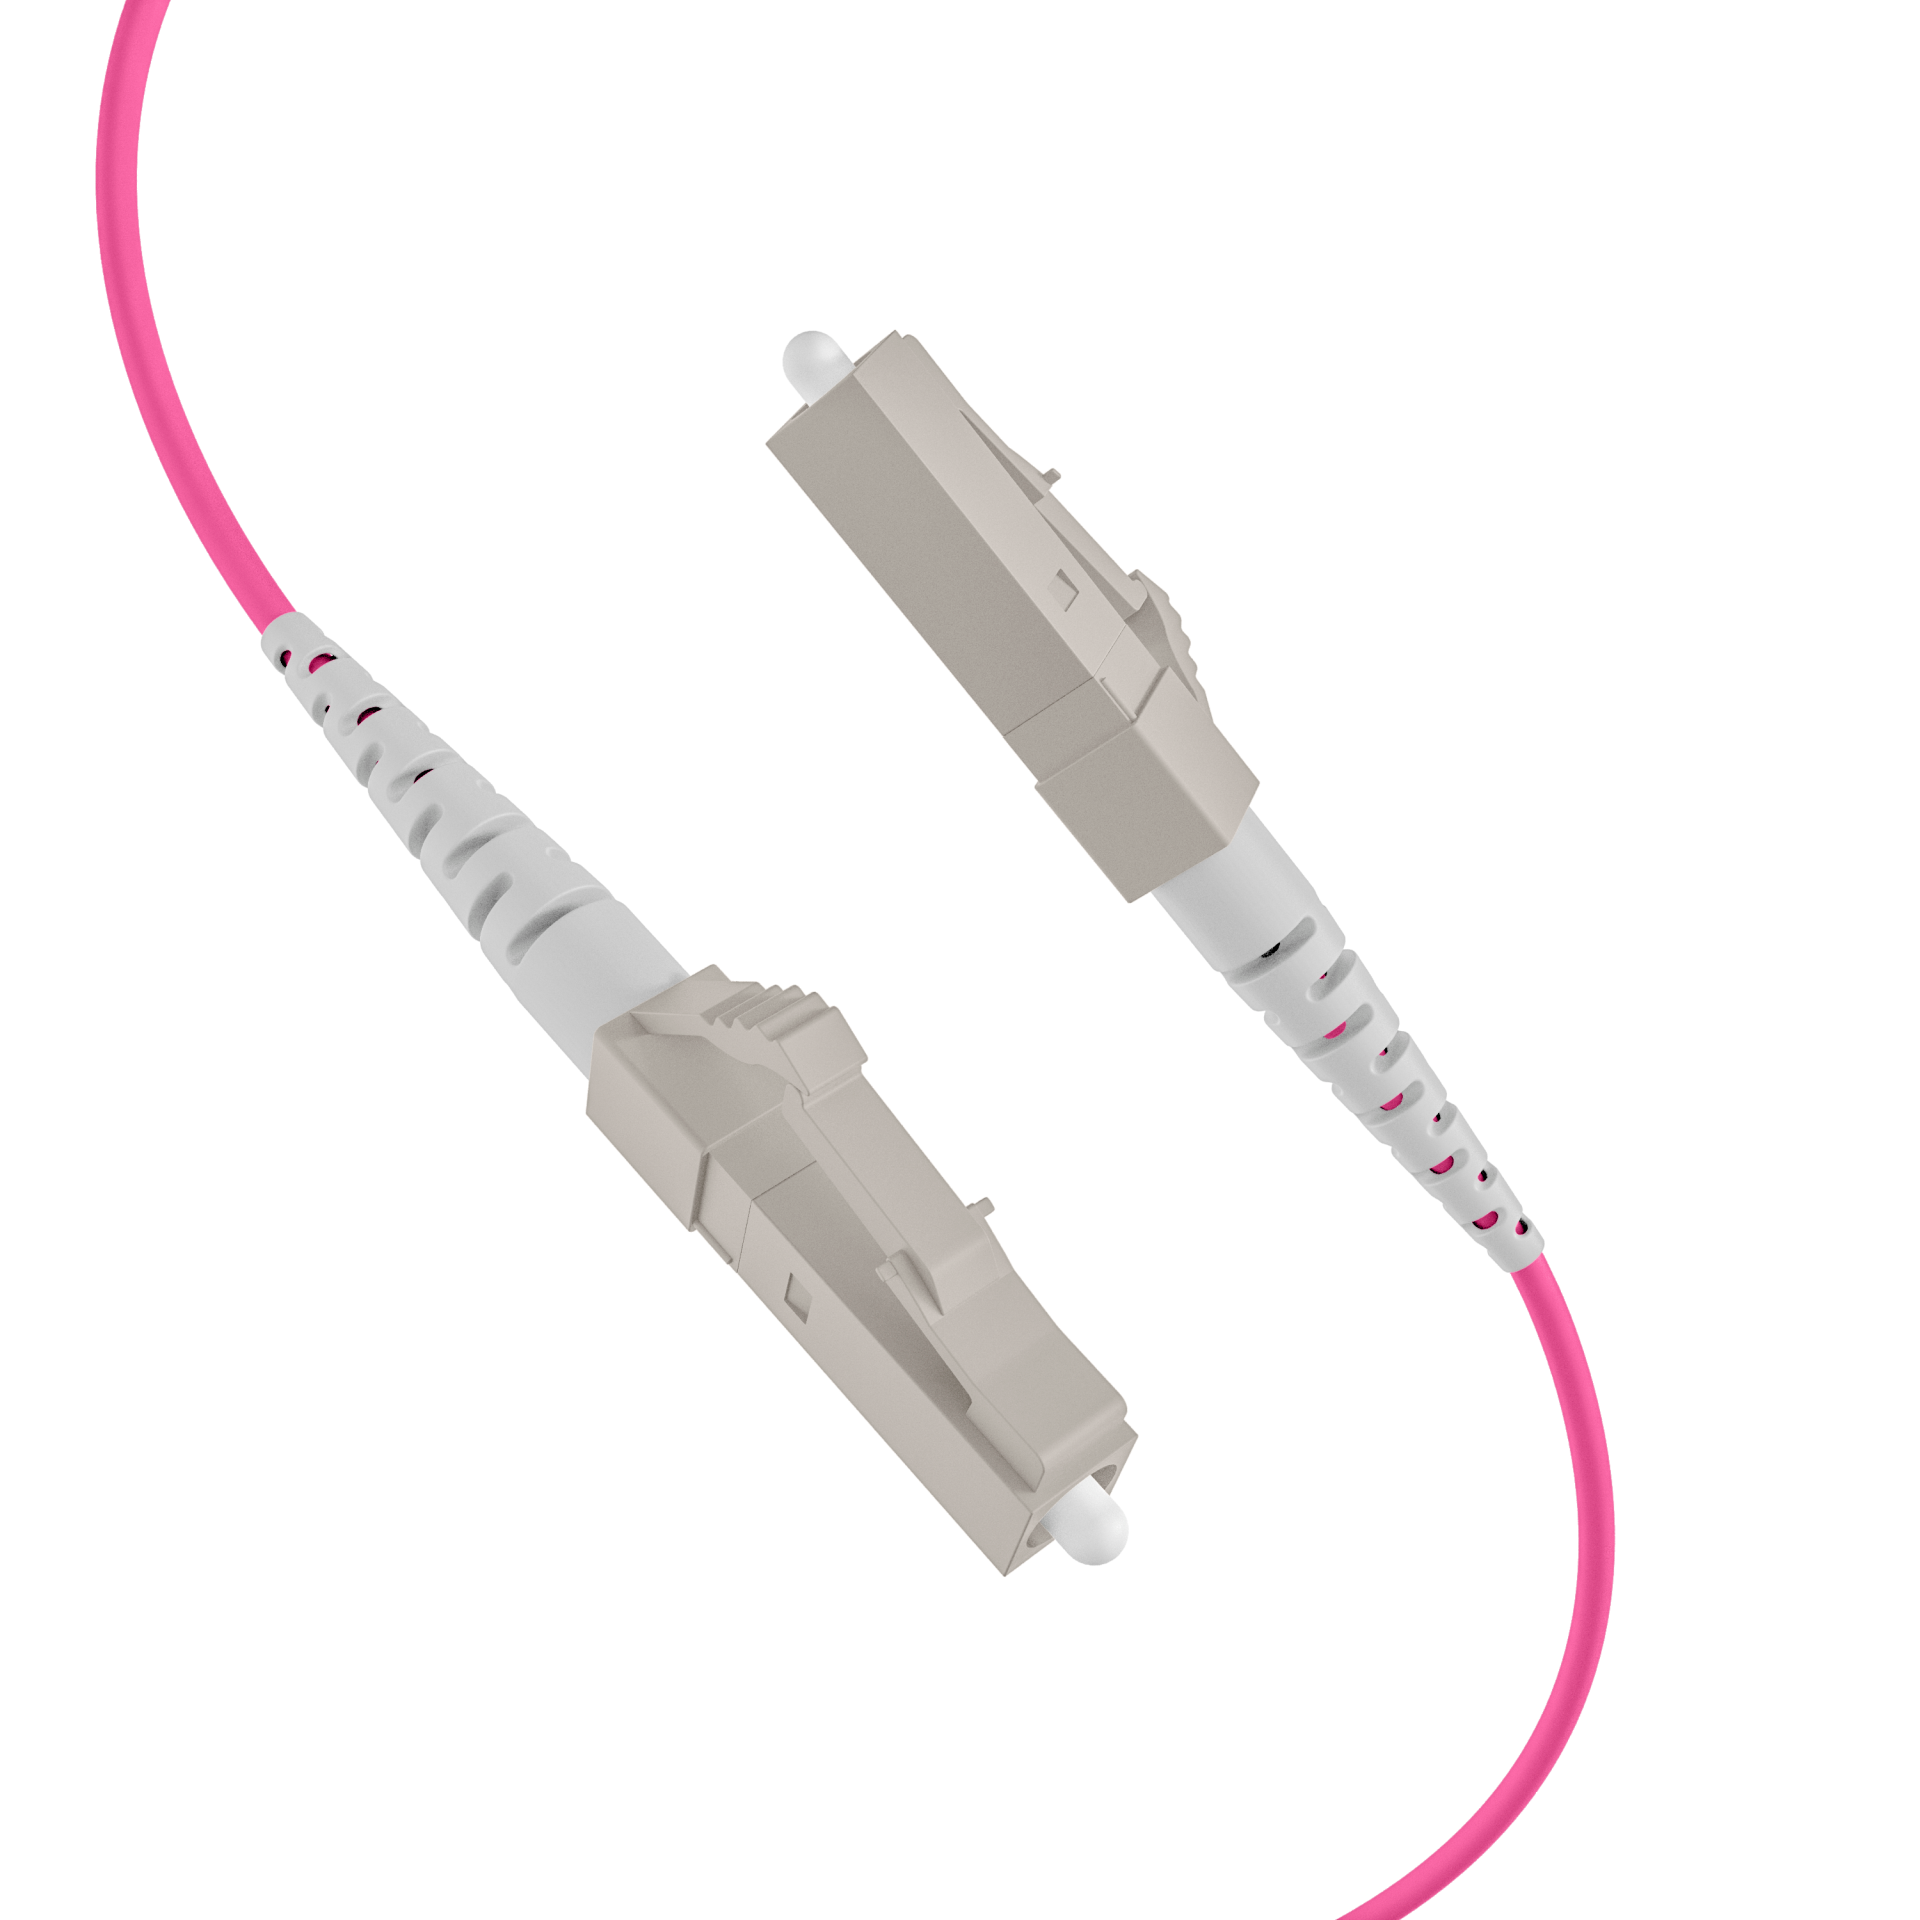 Trunkcable U-DQ(ZN)BH OM4 8G (1x8) LC-LC,110m Dca LSZH